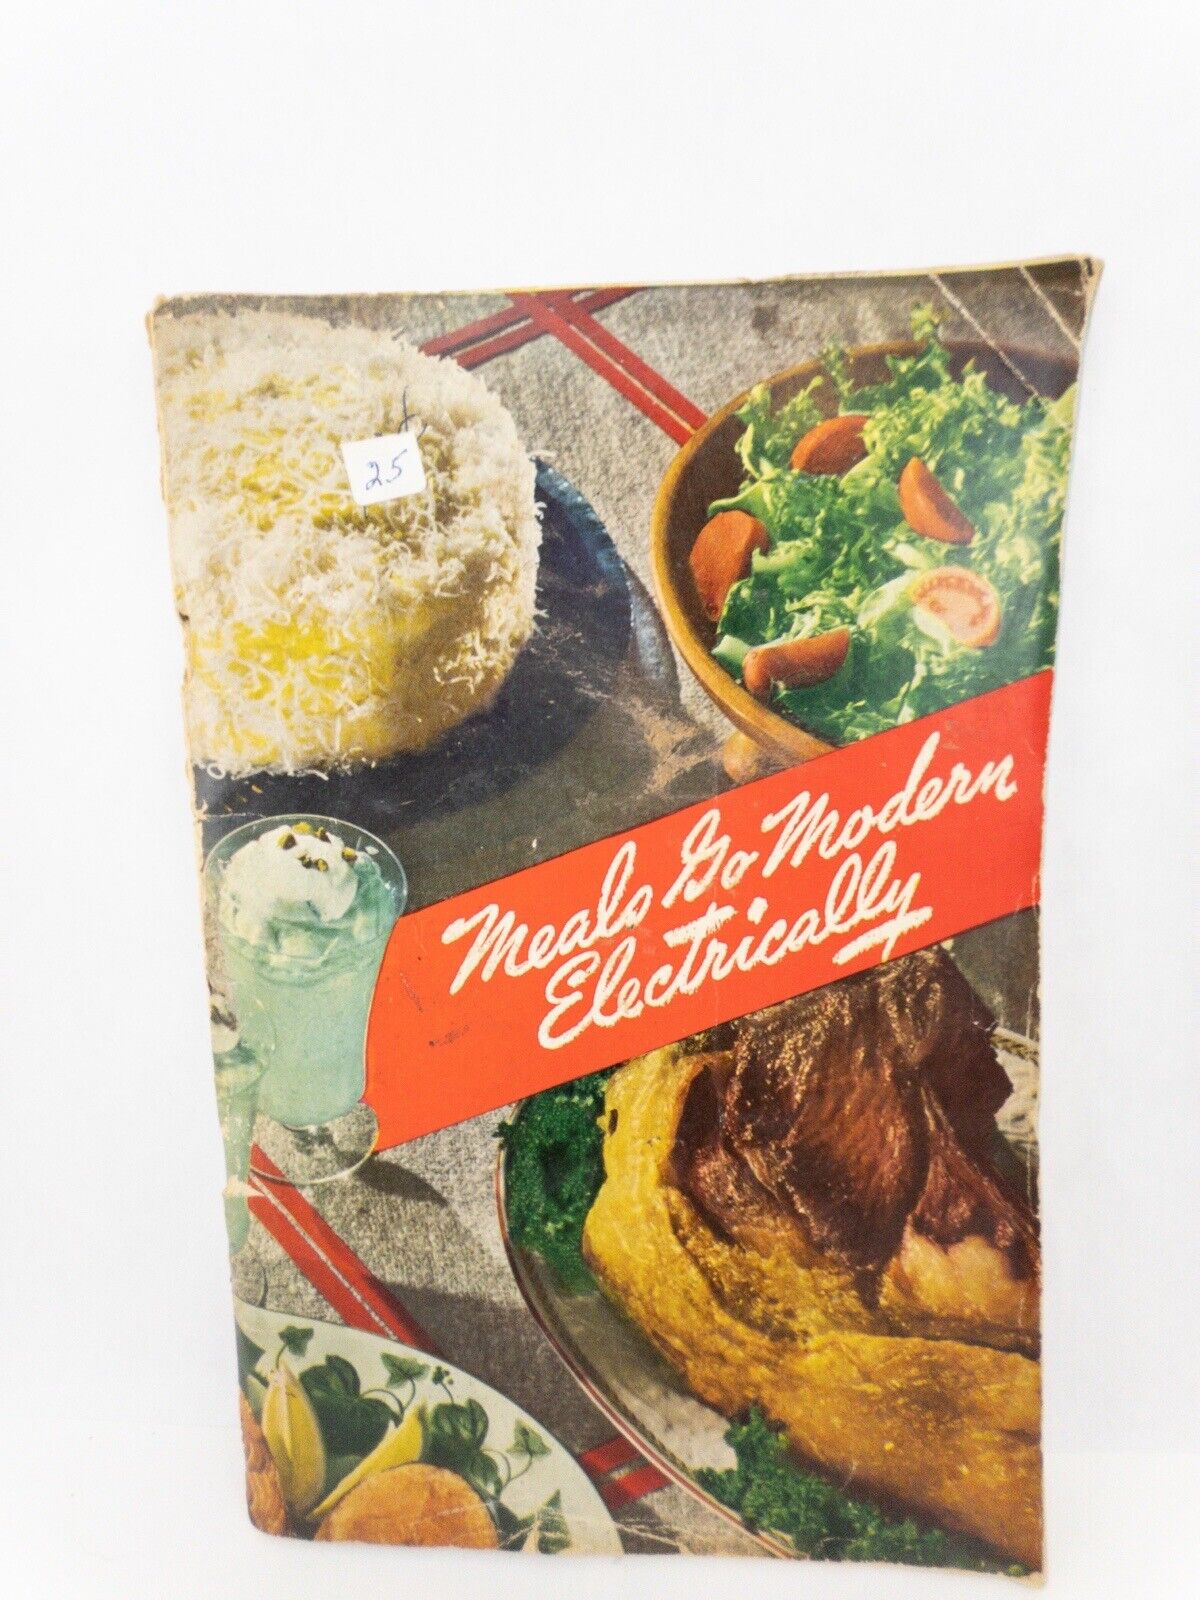 Vintage 1940, Meals Go Modern Electrically, From The Electric Kitchen Bureau